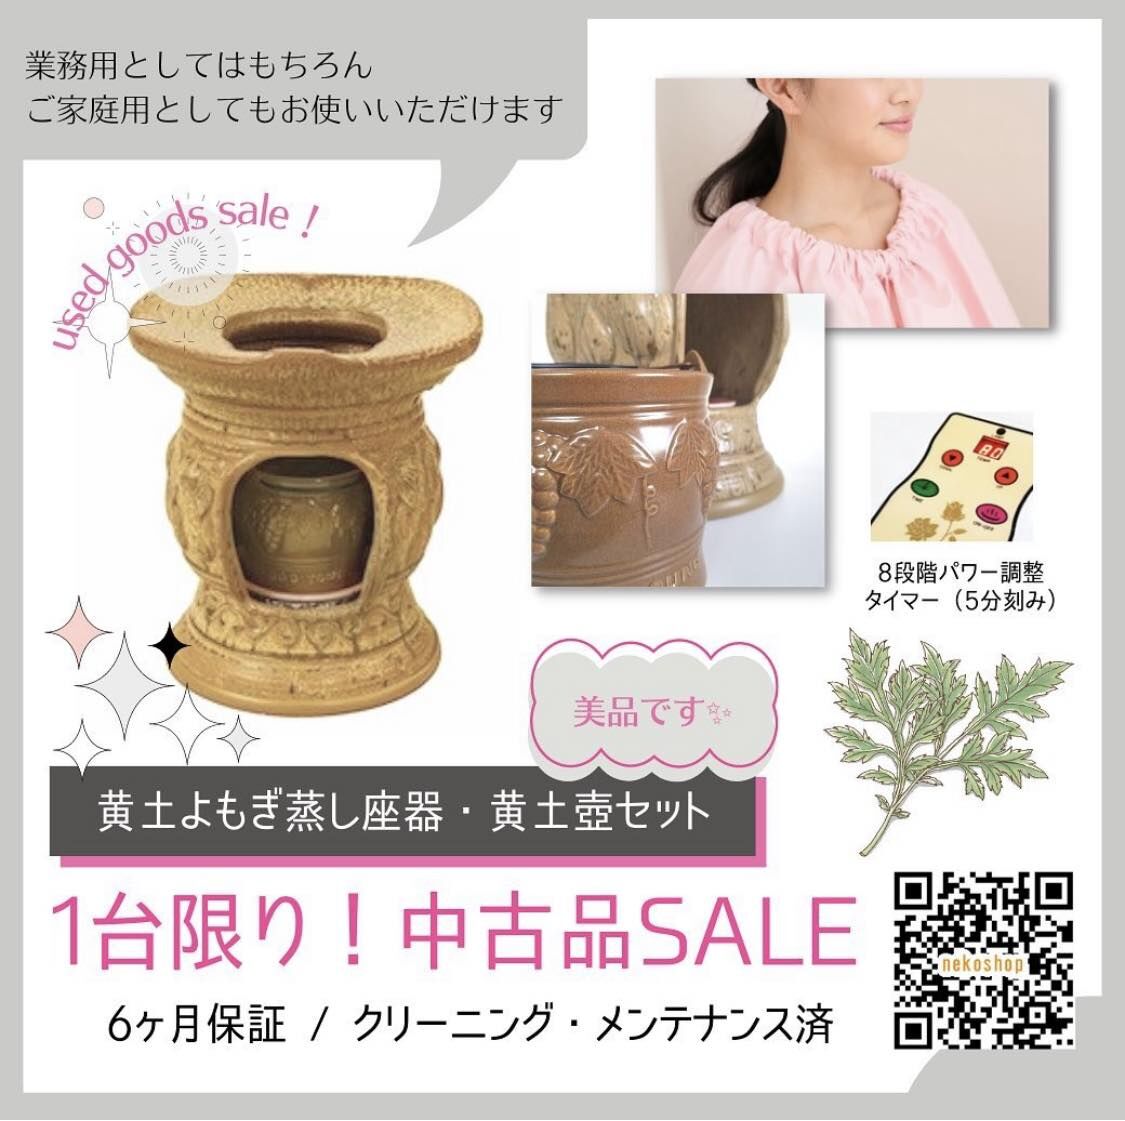 SOLD OUT《中古美品》黄土よもぎ蒸し座器（黄土椅子）＋黄土壺セット